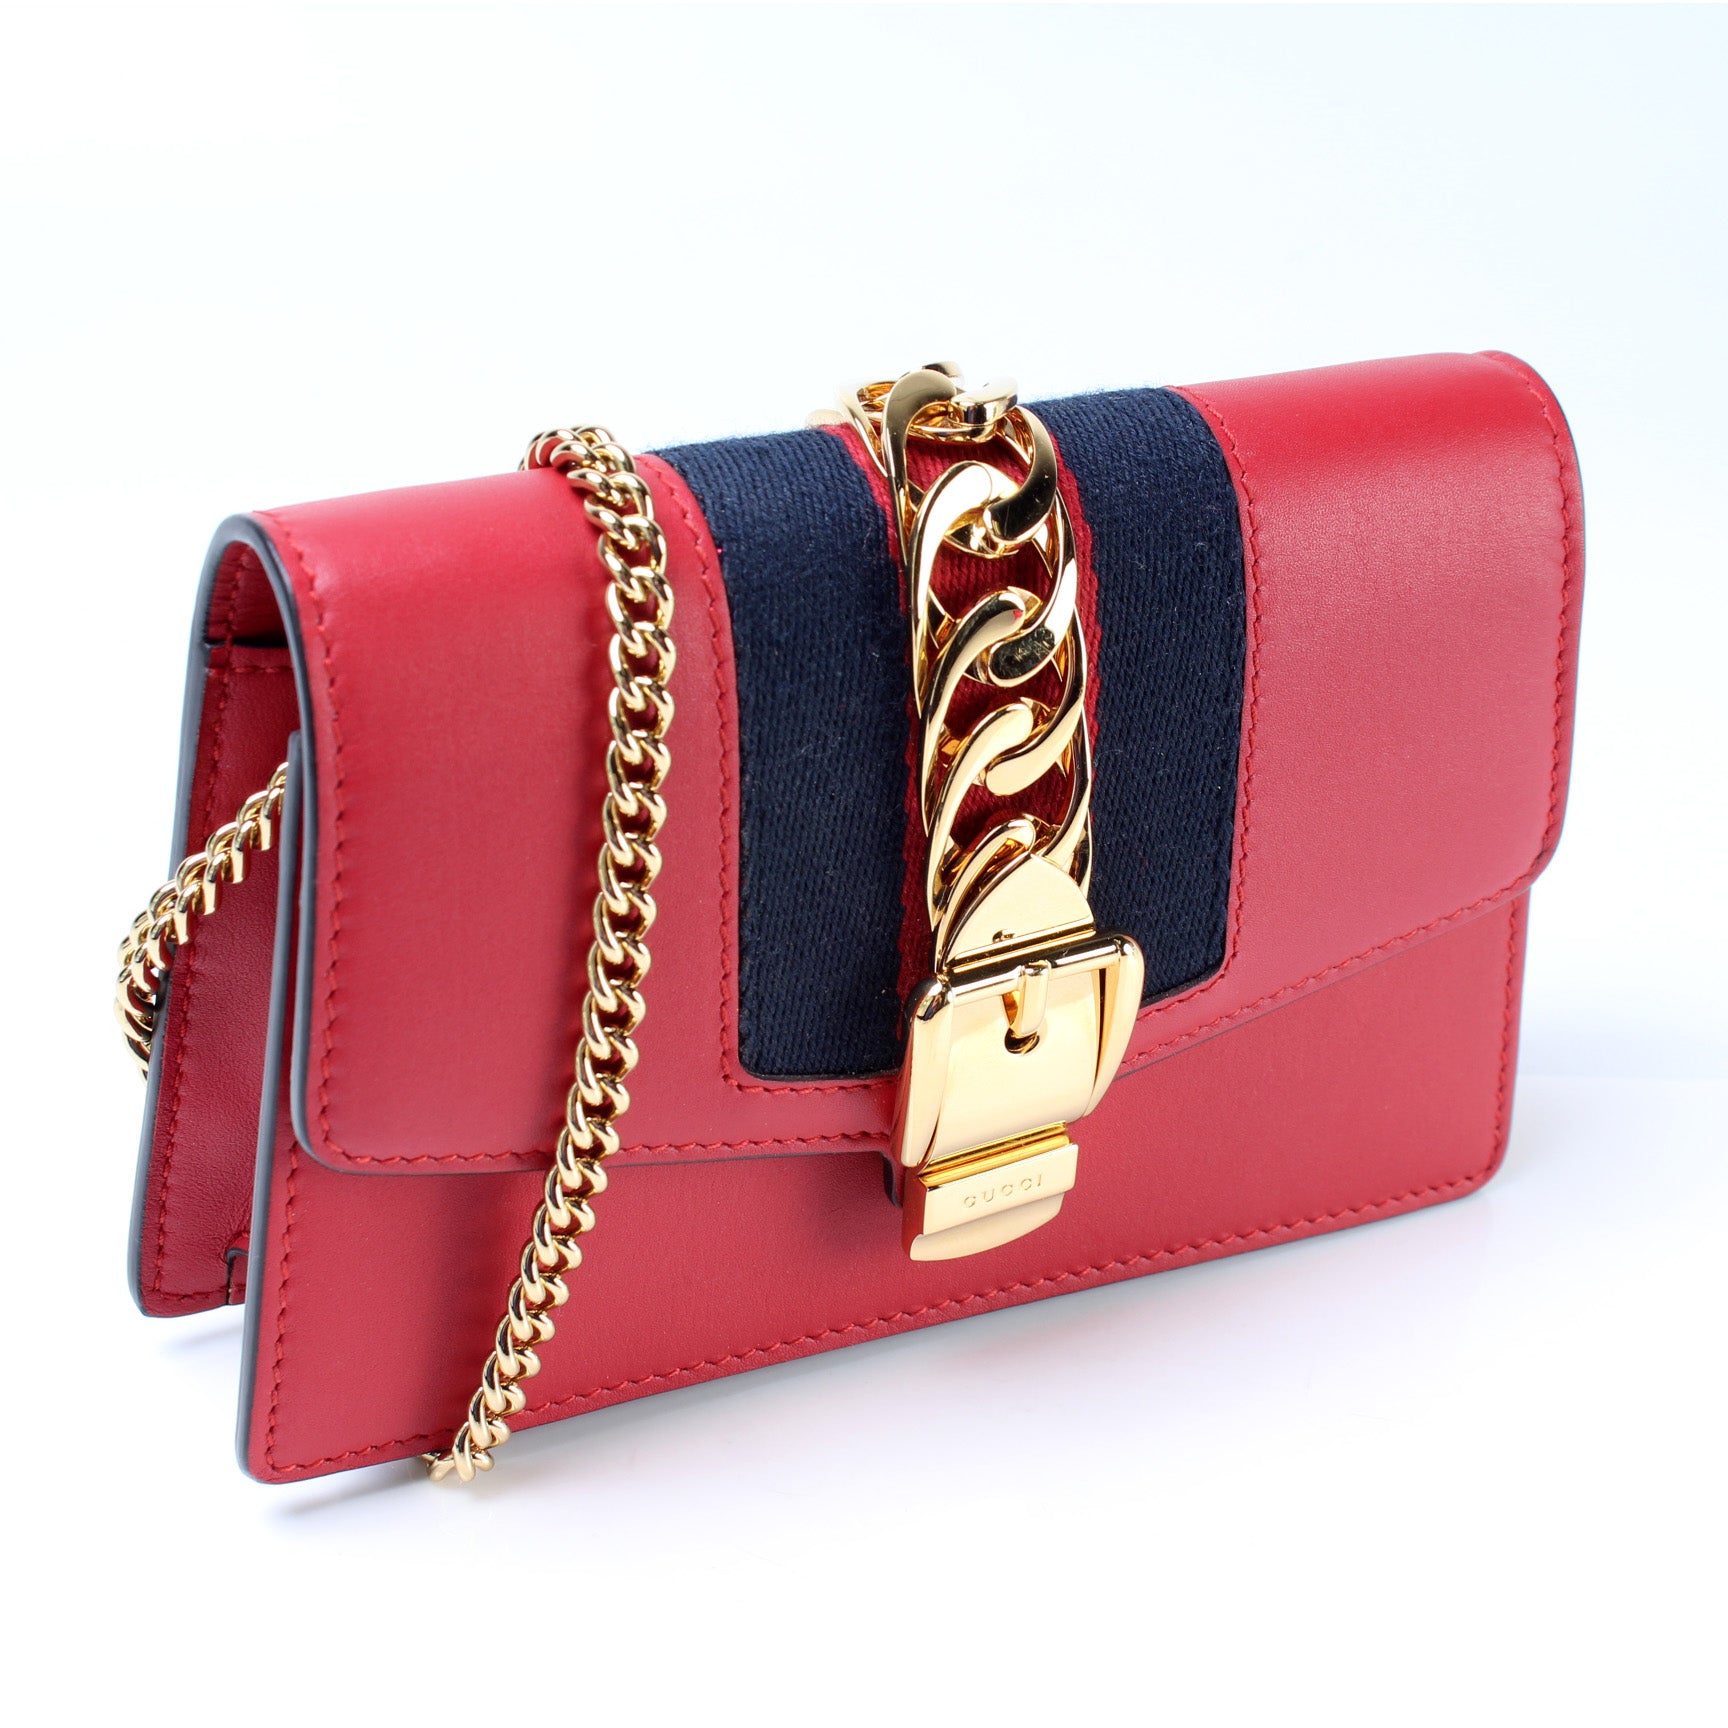 Gucci Red Mini Sylvie Leather Chain Shoulder Bag Multiple colors